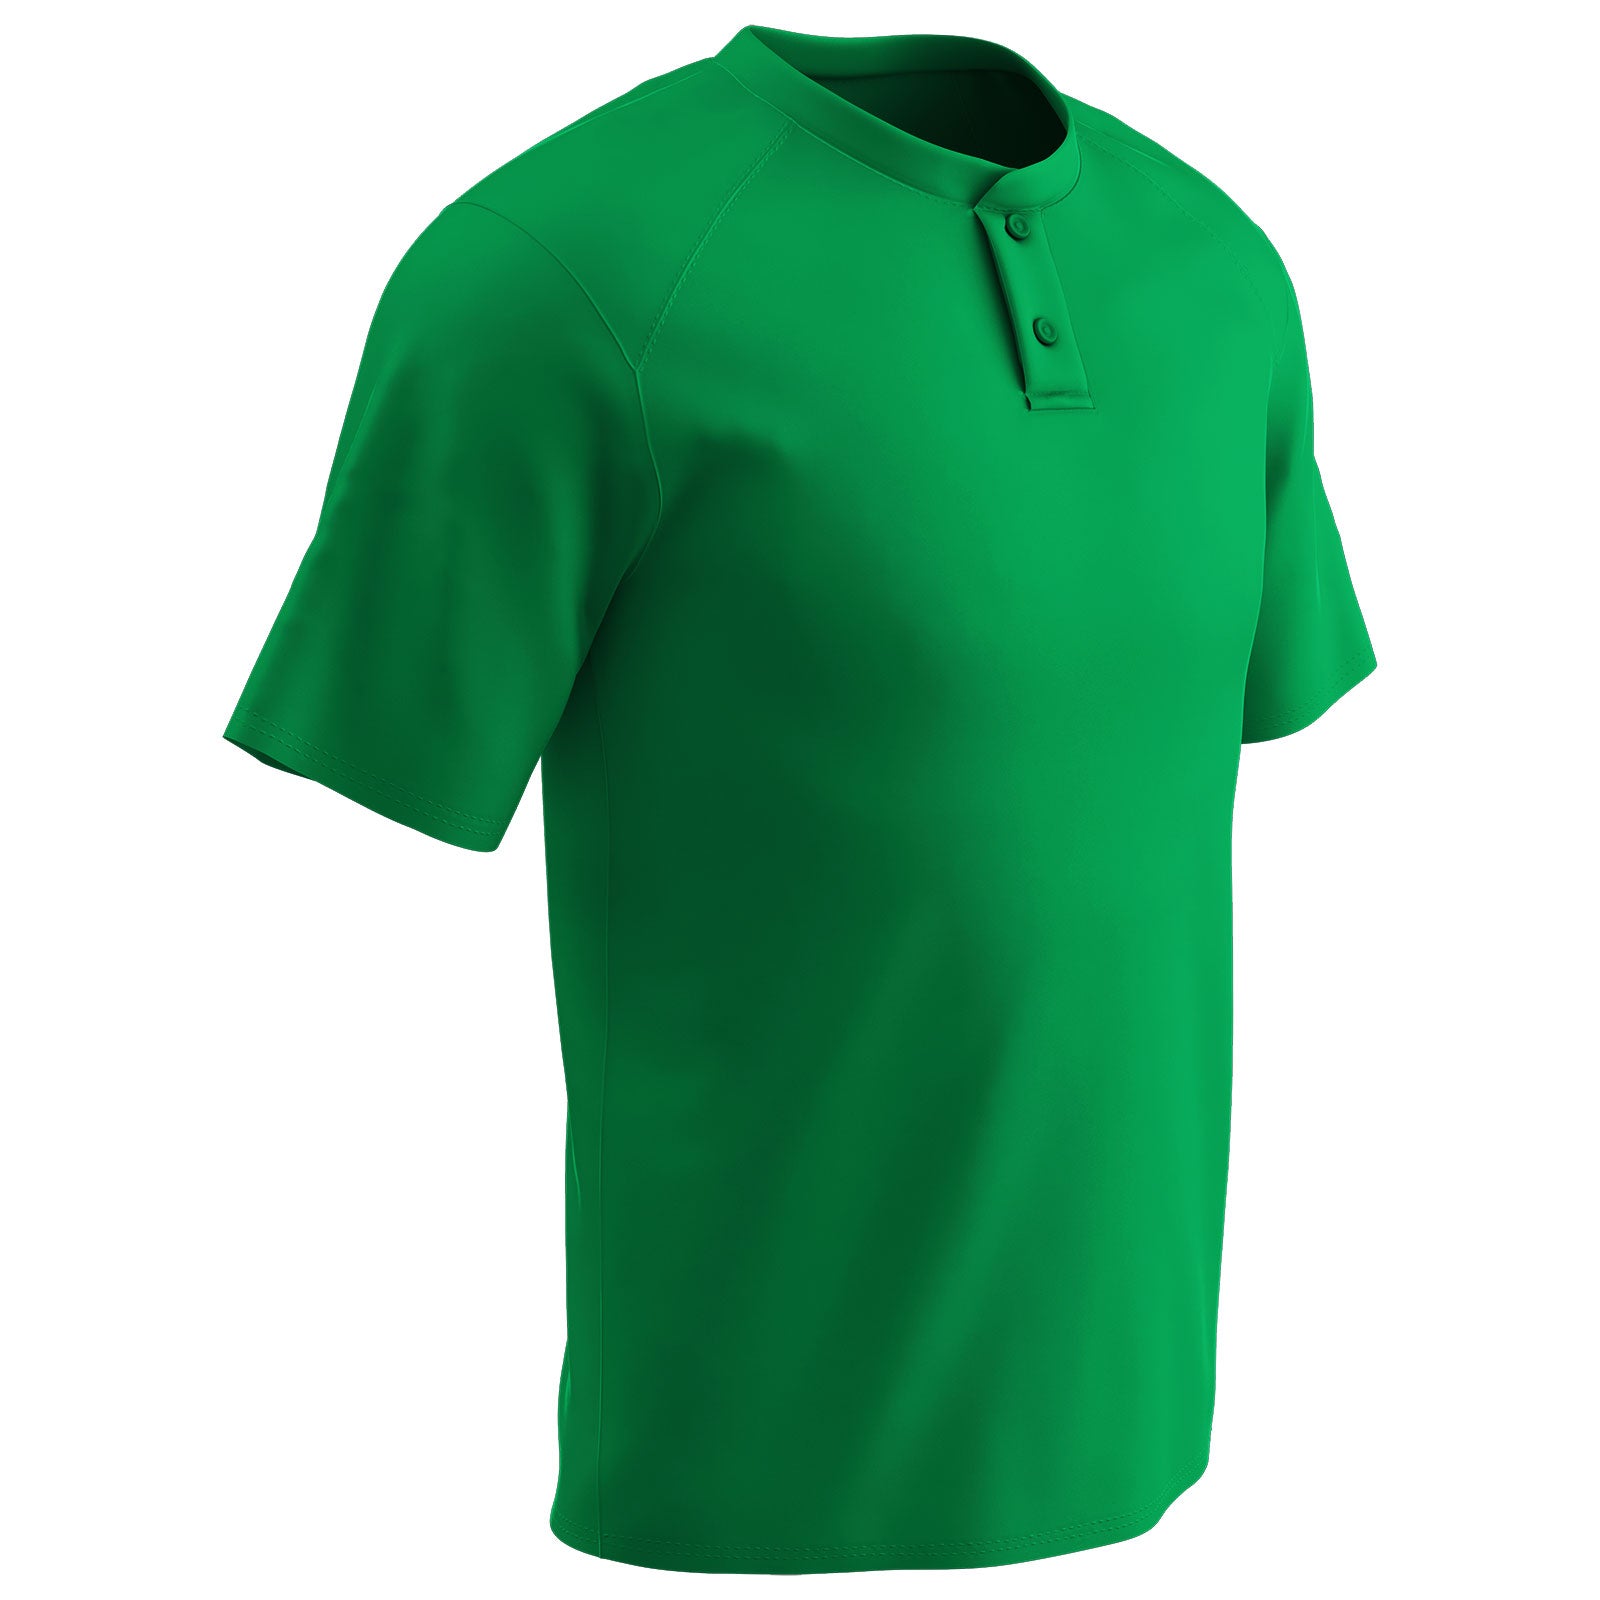 Moisture Wicking Solid Color Two Button Baseball Jersey KELLY GREEN BODY